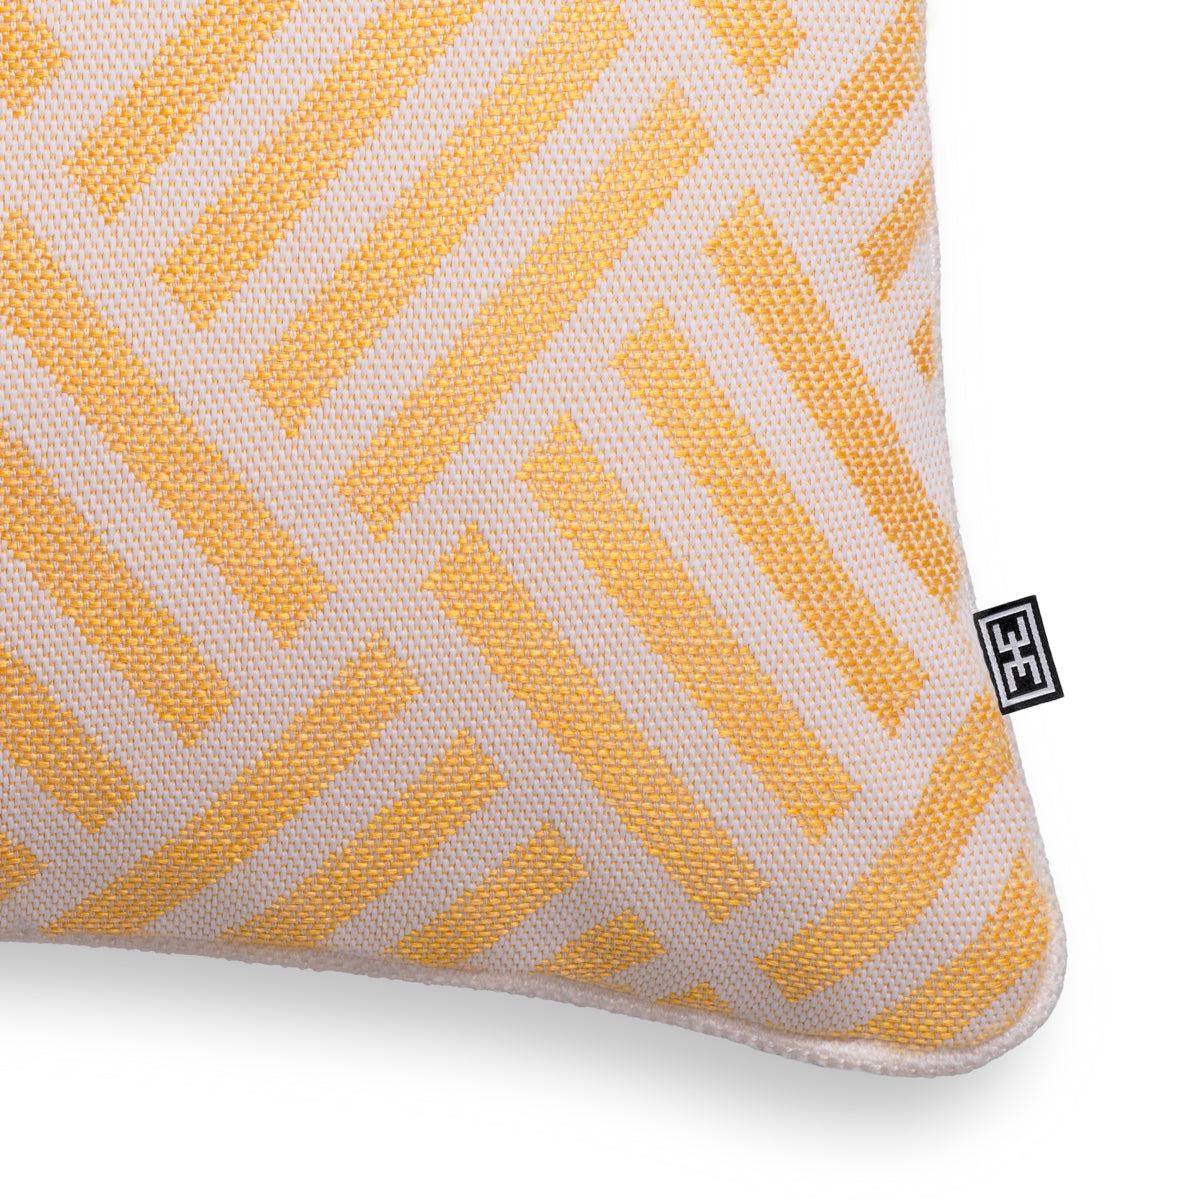 Cushion Sonel S yellow with white piping